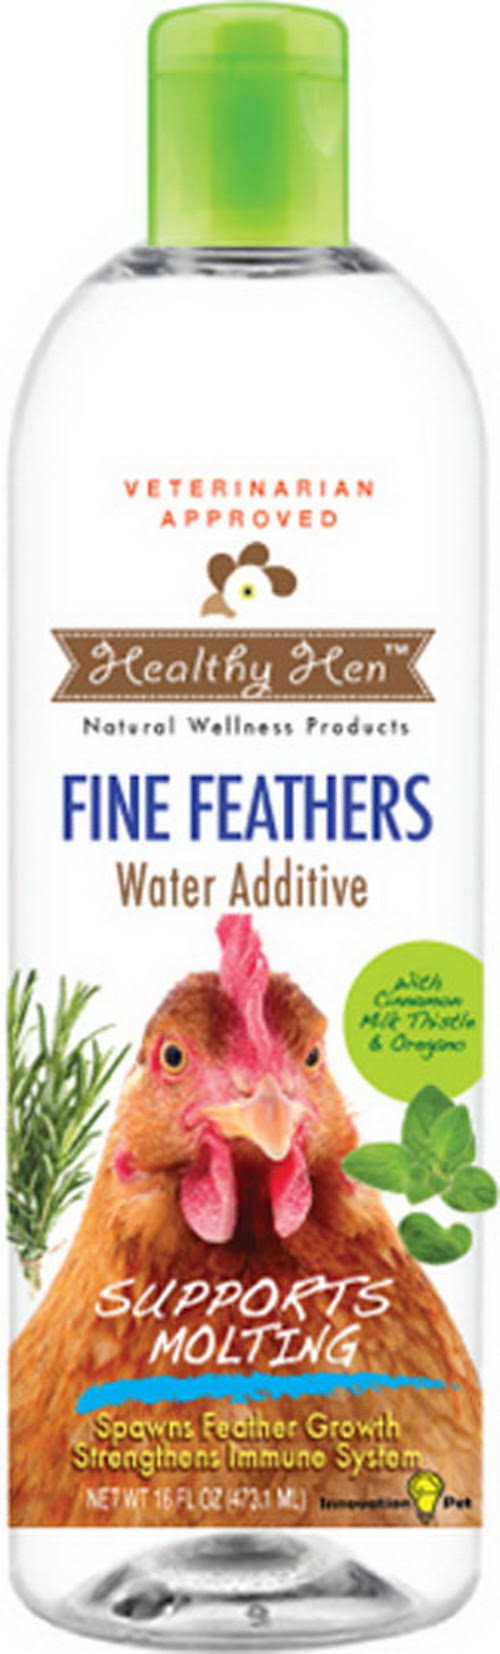 Healthy Hen Fine Feathers Water Additive 16 oz.